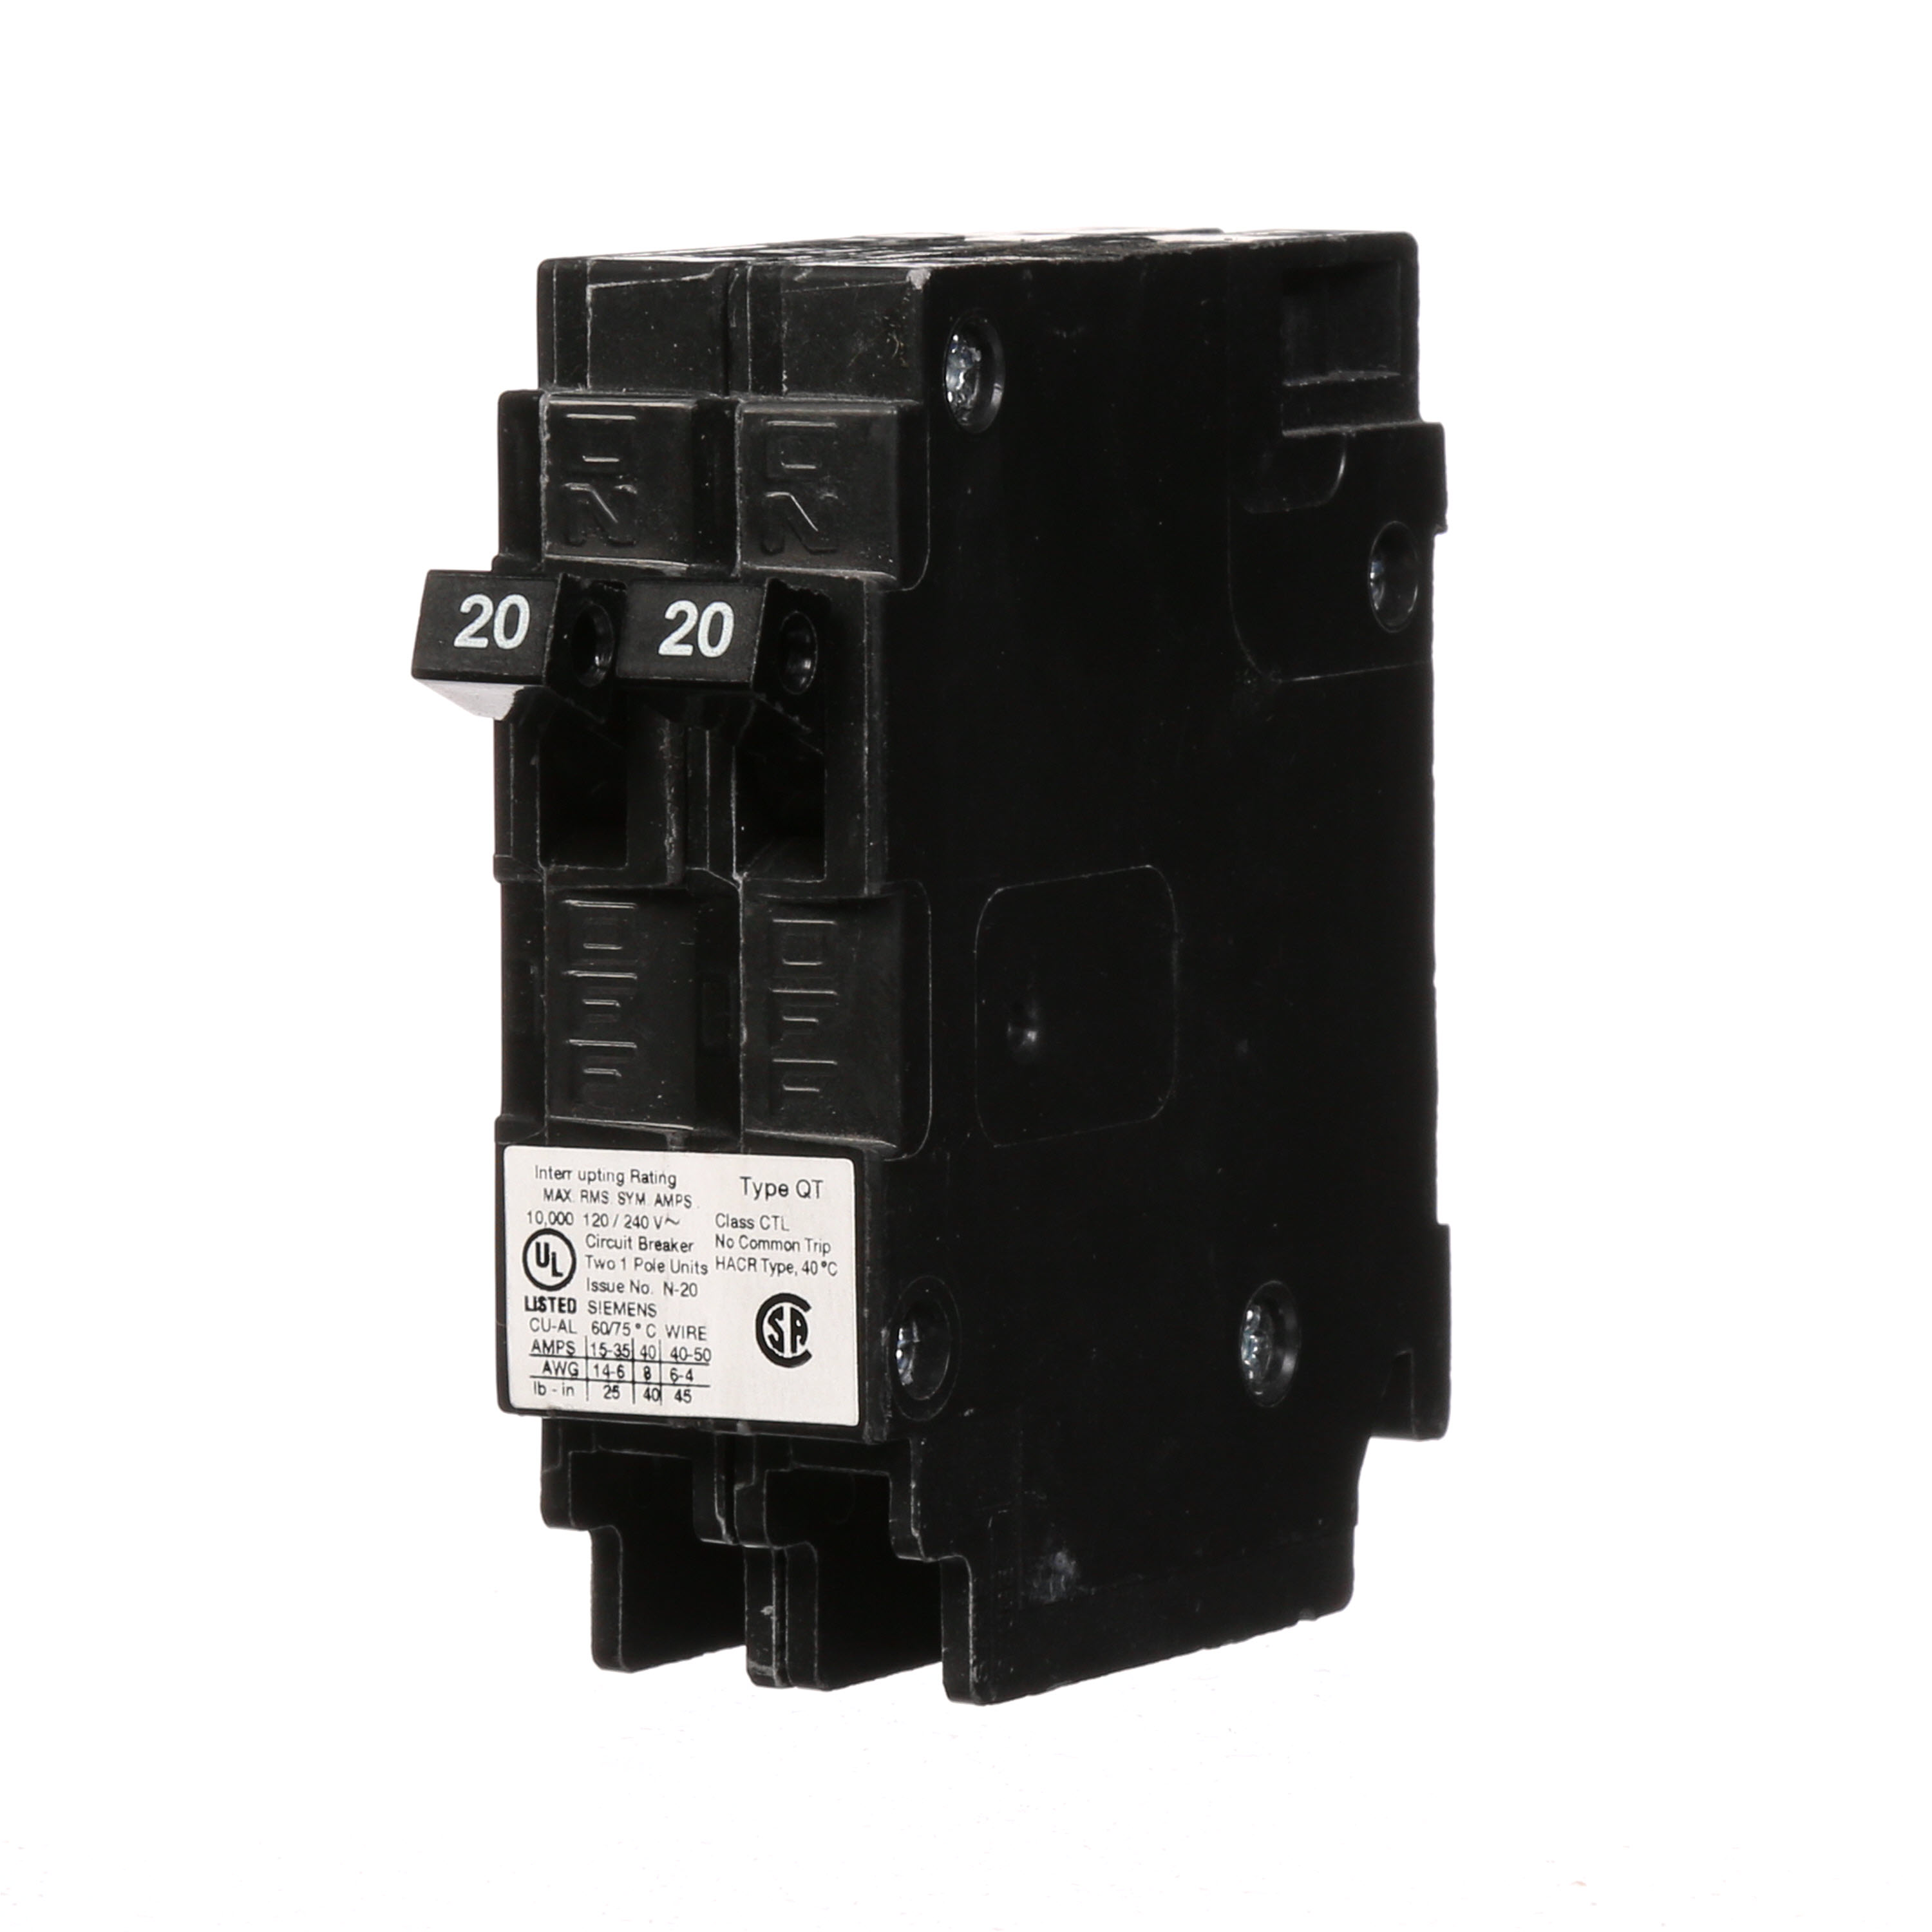 Siemens Low Voltage Residential Circuit Breakers Miniature Thermal Mag Circuit Breakers - Duplex, Triplex, Quadplex are Circuit Protection Load Center Mains, Feeders, and Miniature Circuit Breakers. Dimensions (L x W x H) IN 3 x 2 x 3. Type QT for electrical distribution applications. Meets stds UL 489. Rated 120V (20-20A). Connector plug-in 1-Pole. (AIR 10 AIC). No special features listed.